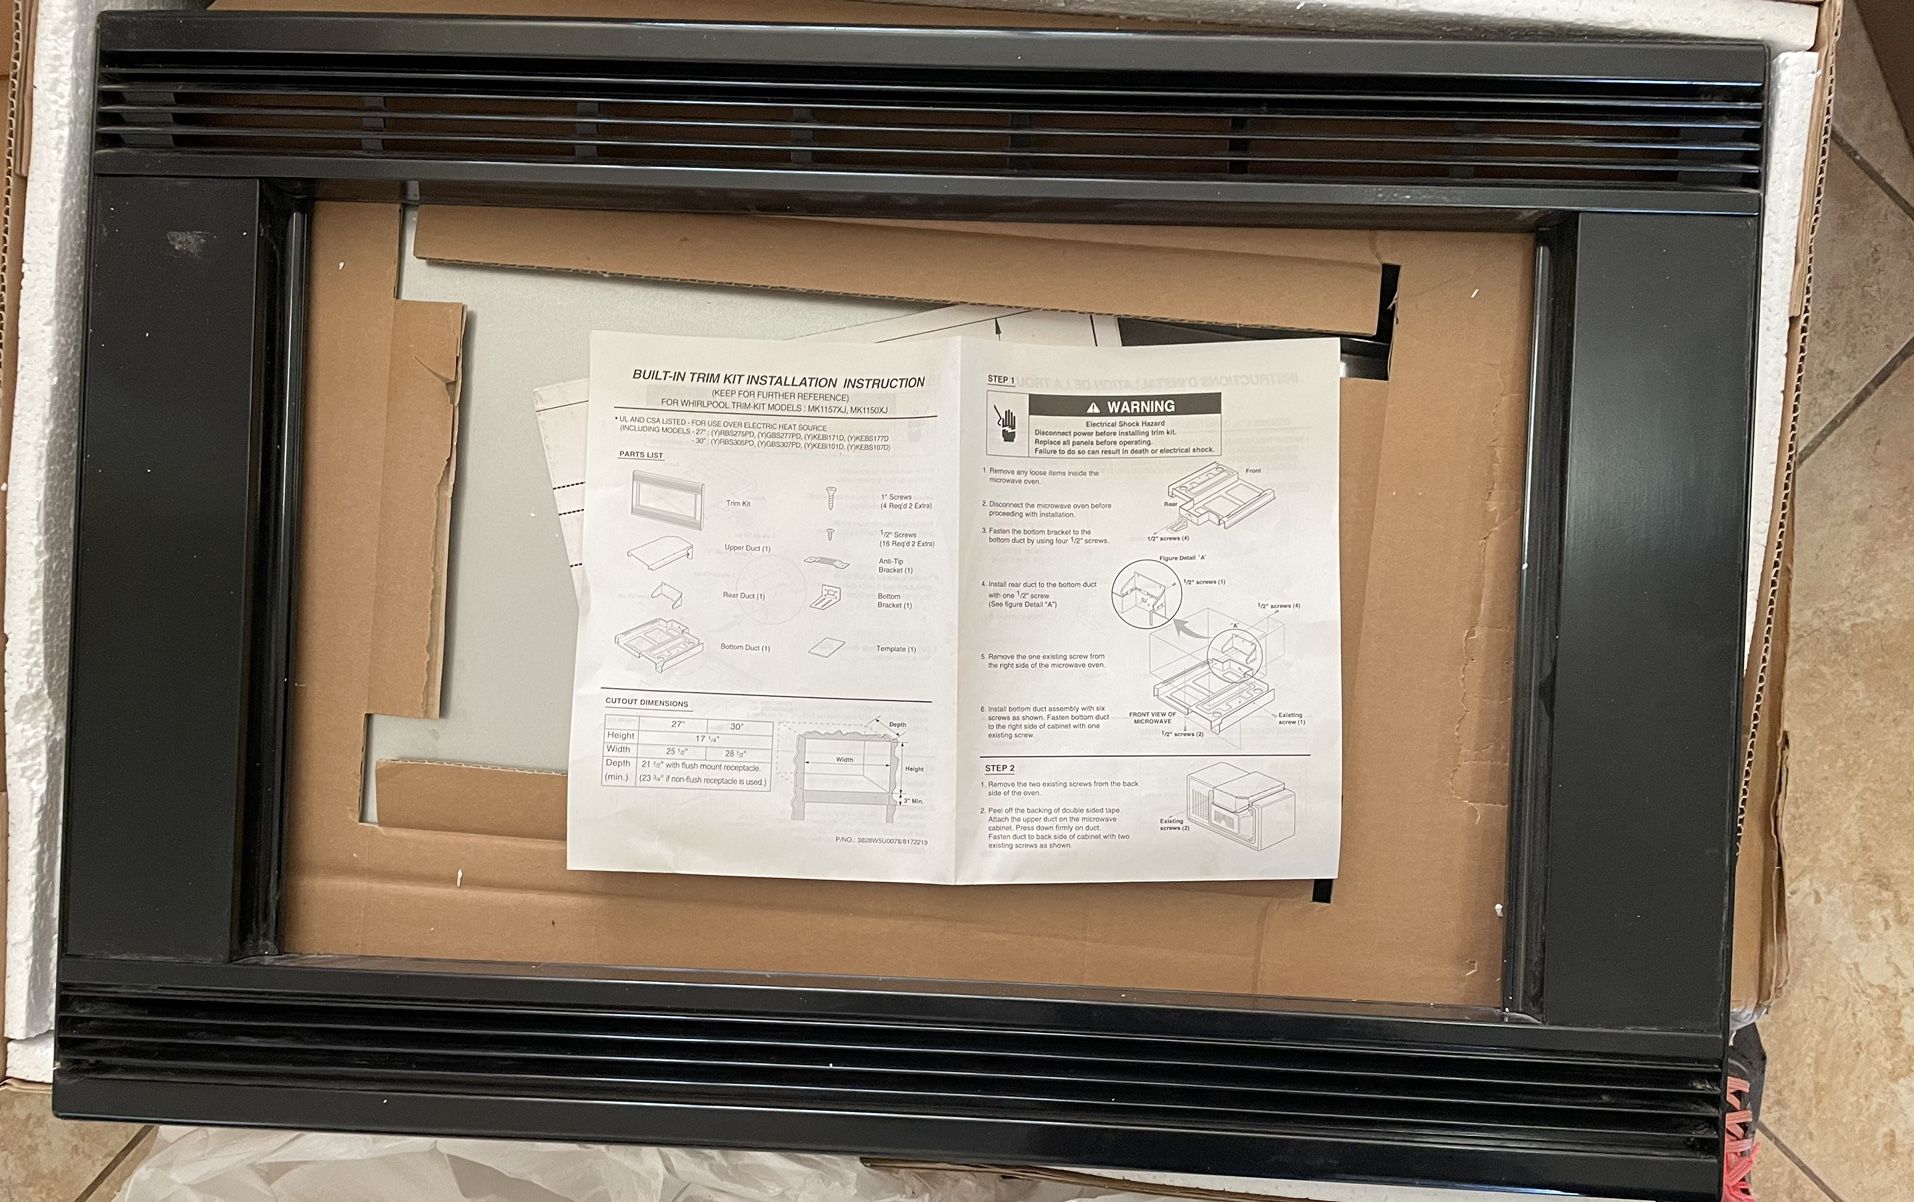 Trim Kit For Built in Microwave